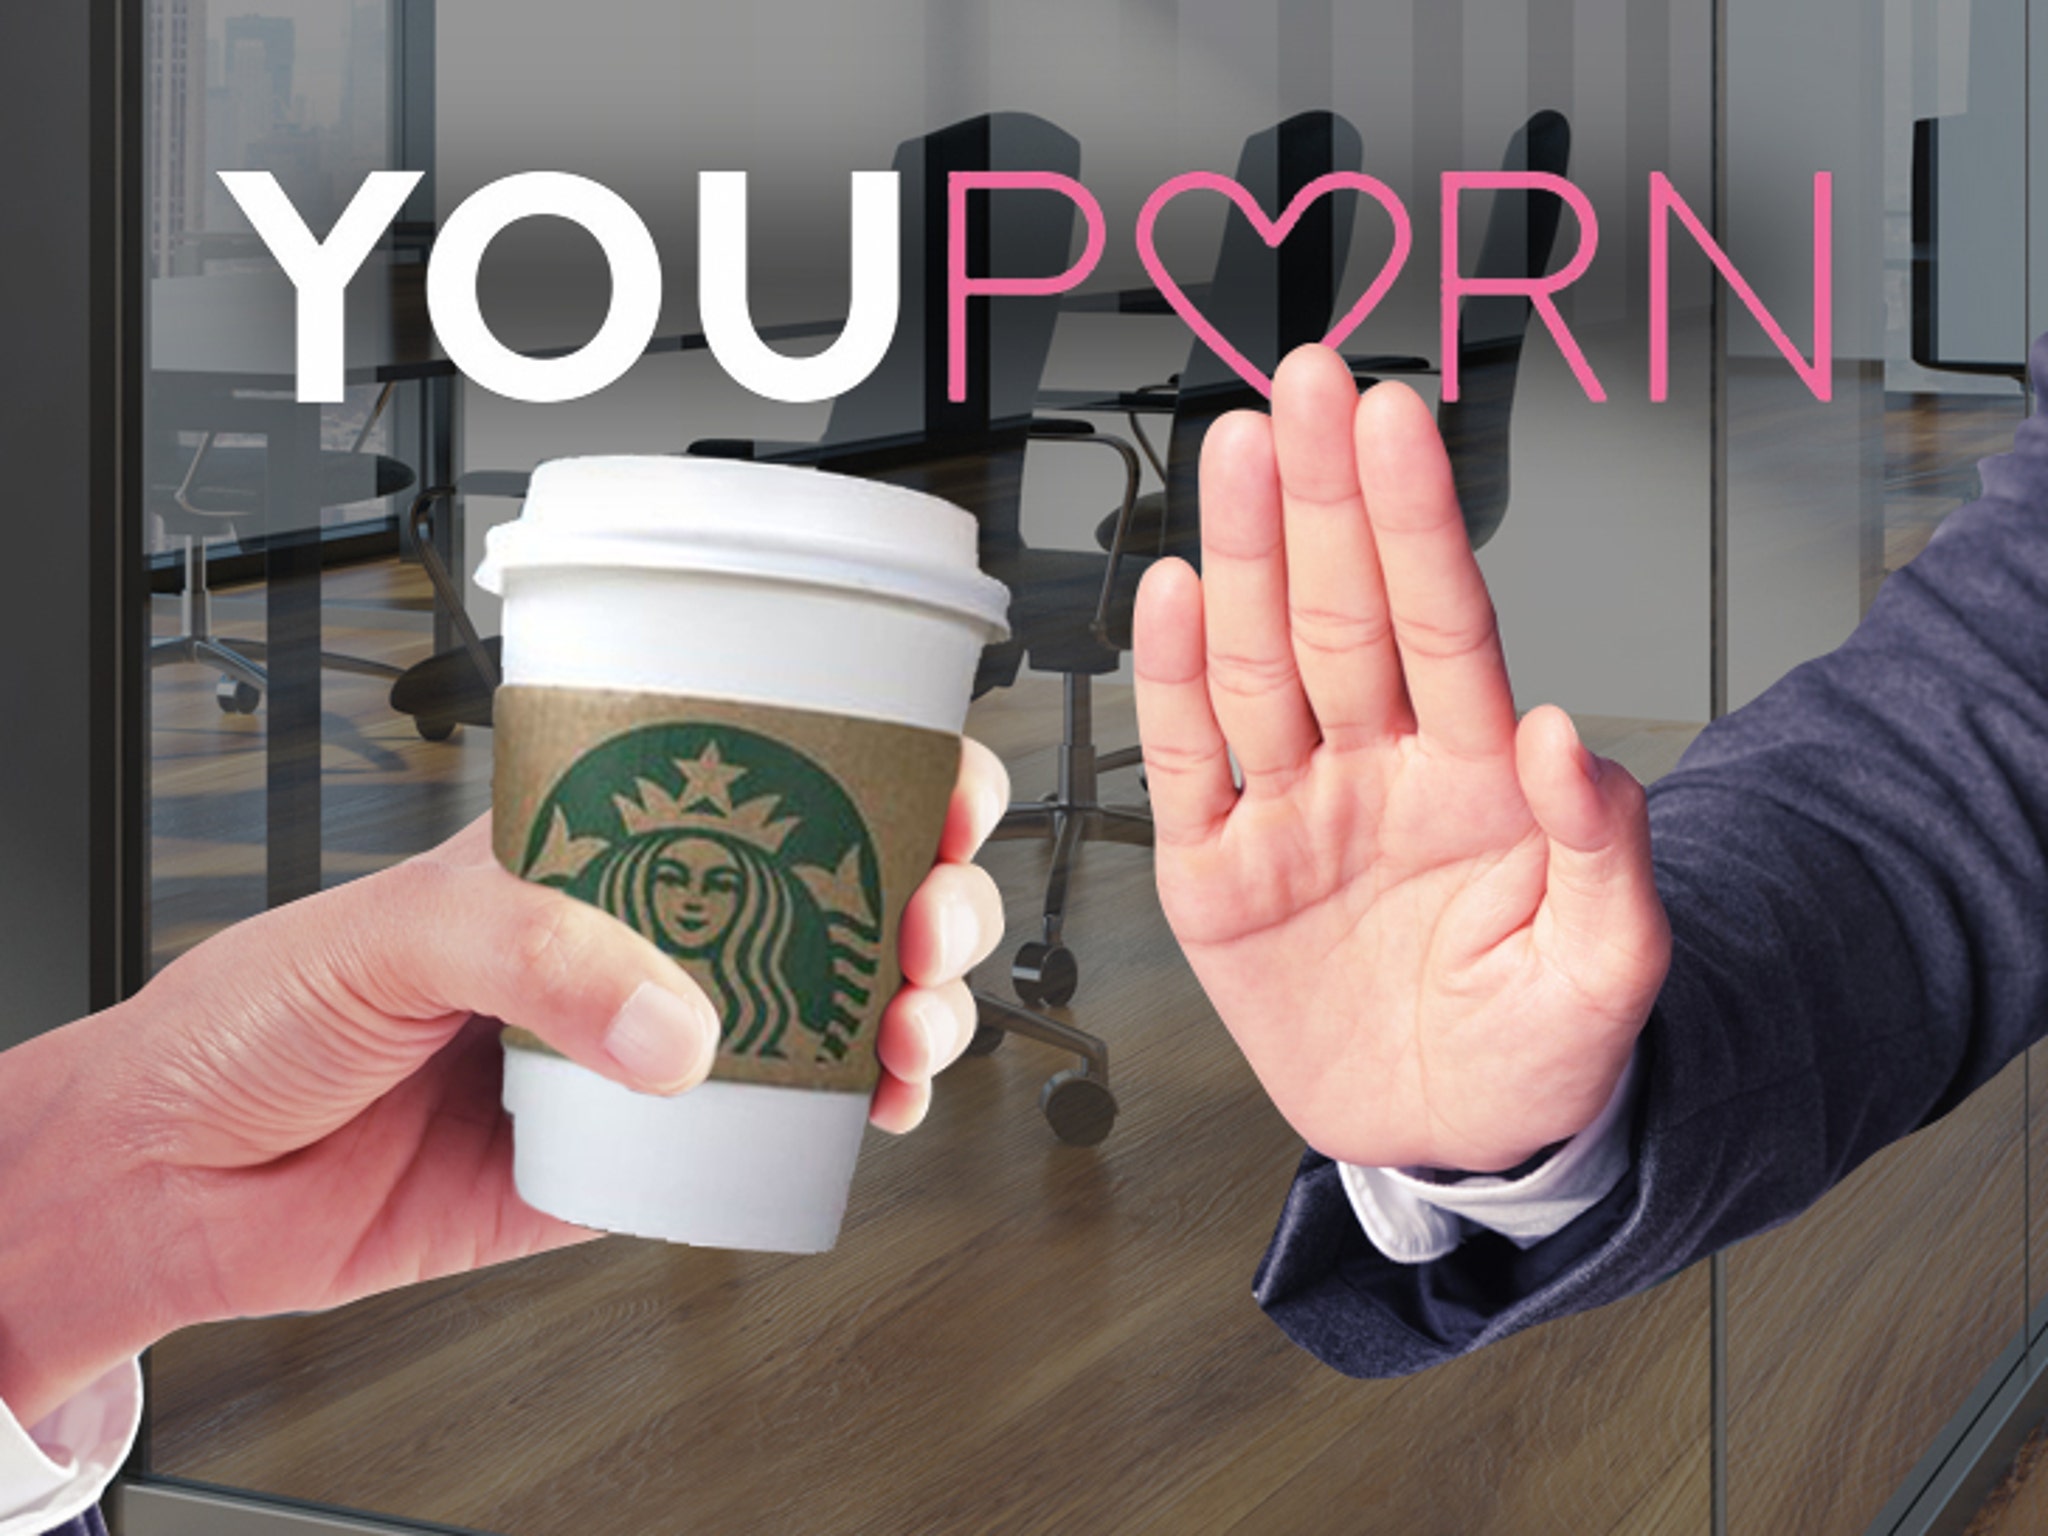 Youpone - YouPorn Strikes Back, Bans Starbucks From its Office and Switches to Dunkin'